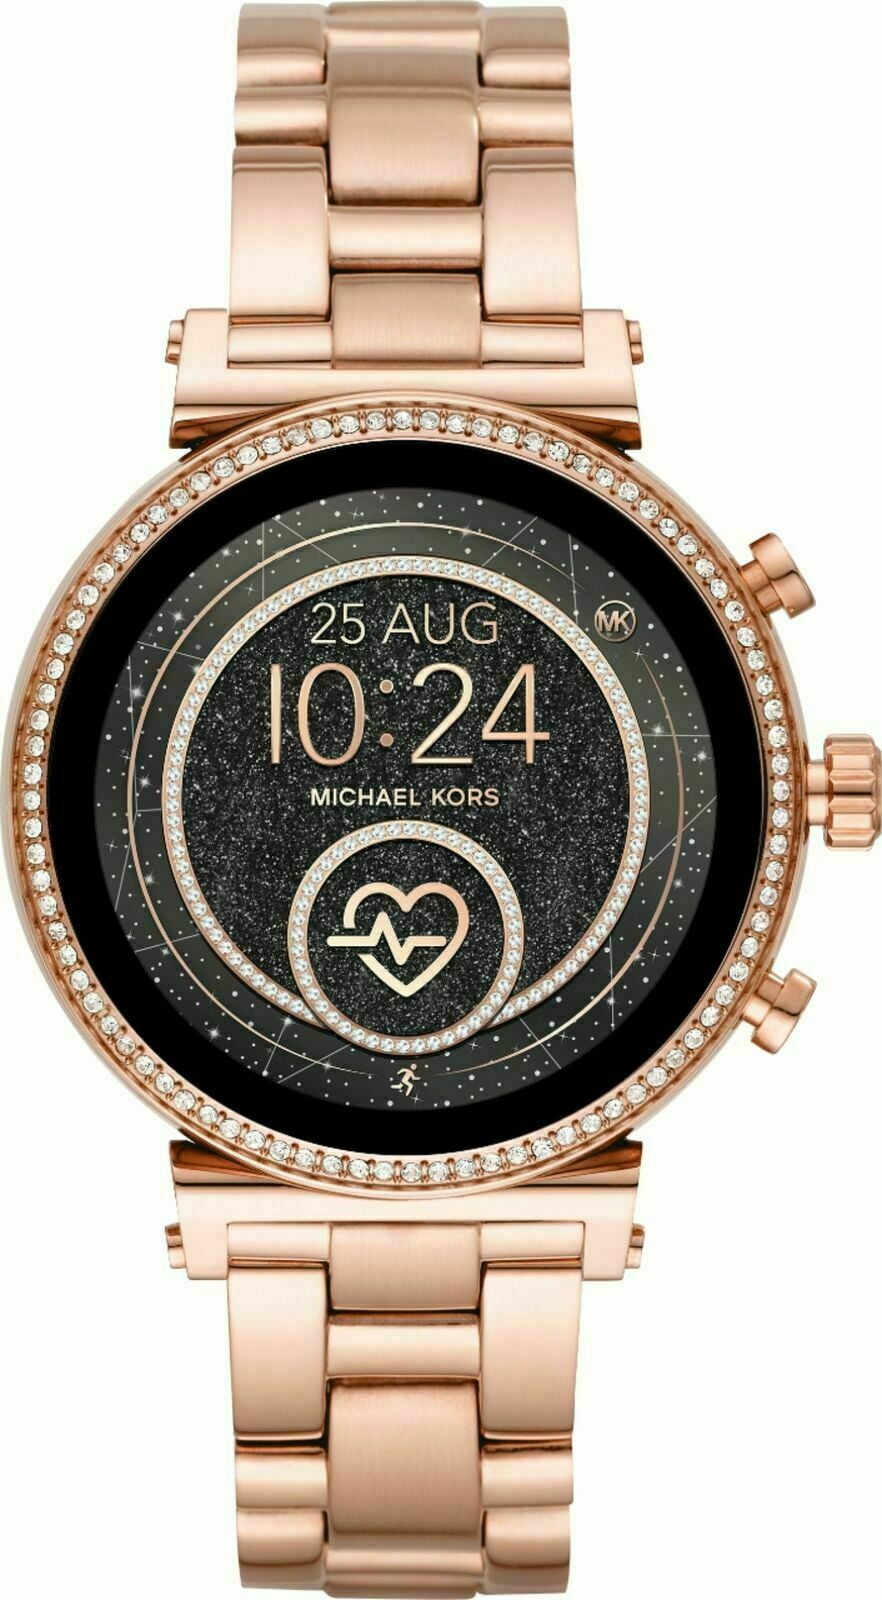 Amazoncom Michael Kors Access Womens Sofie Heart Rate TouchScreen  Smartwatch with StainlessSteel Strap Rose Gold 18 Model MKT5063   Electronics